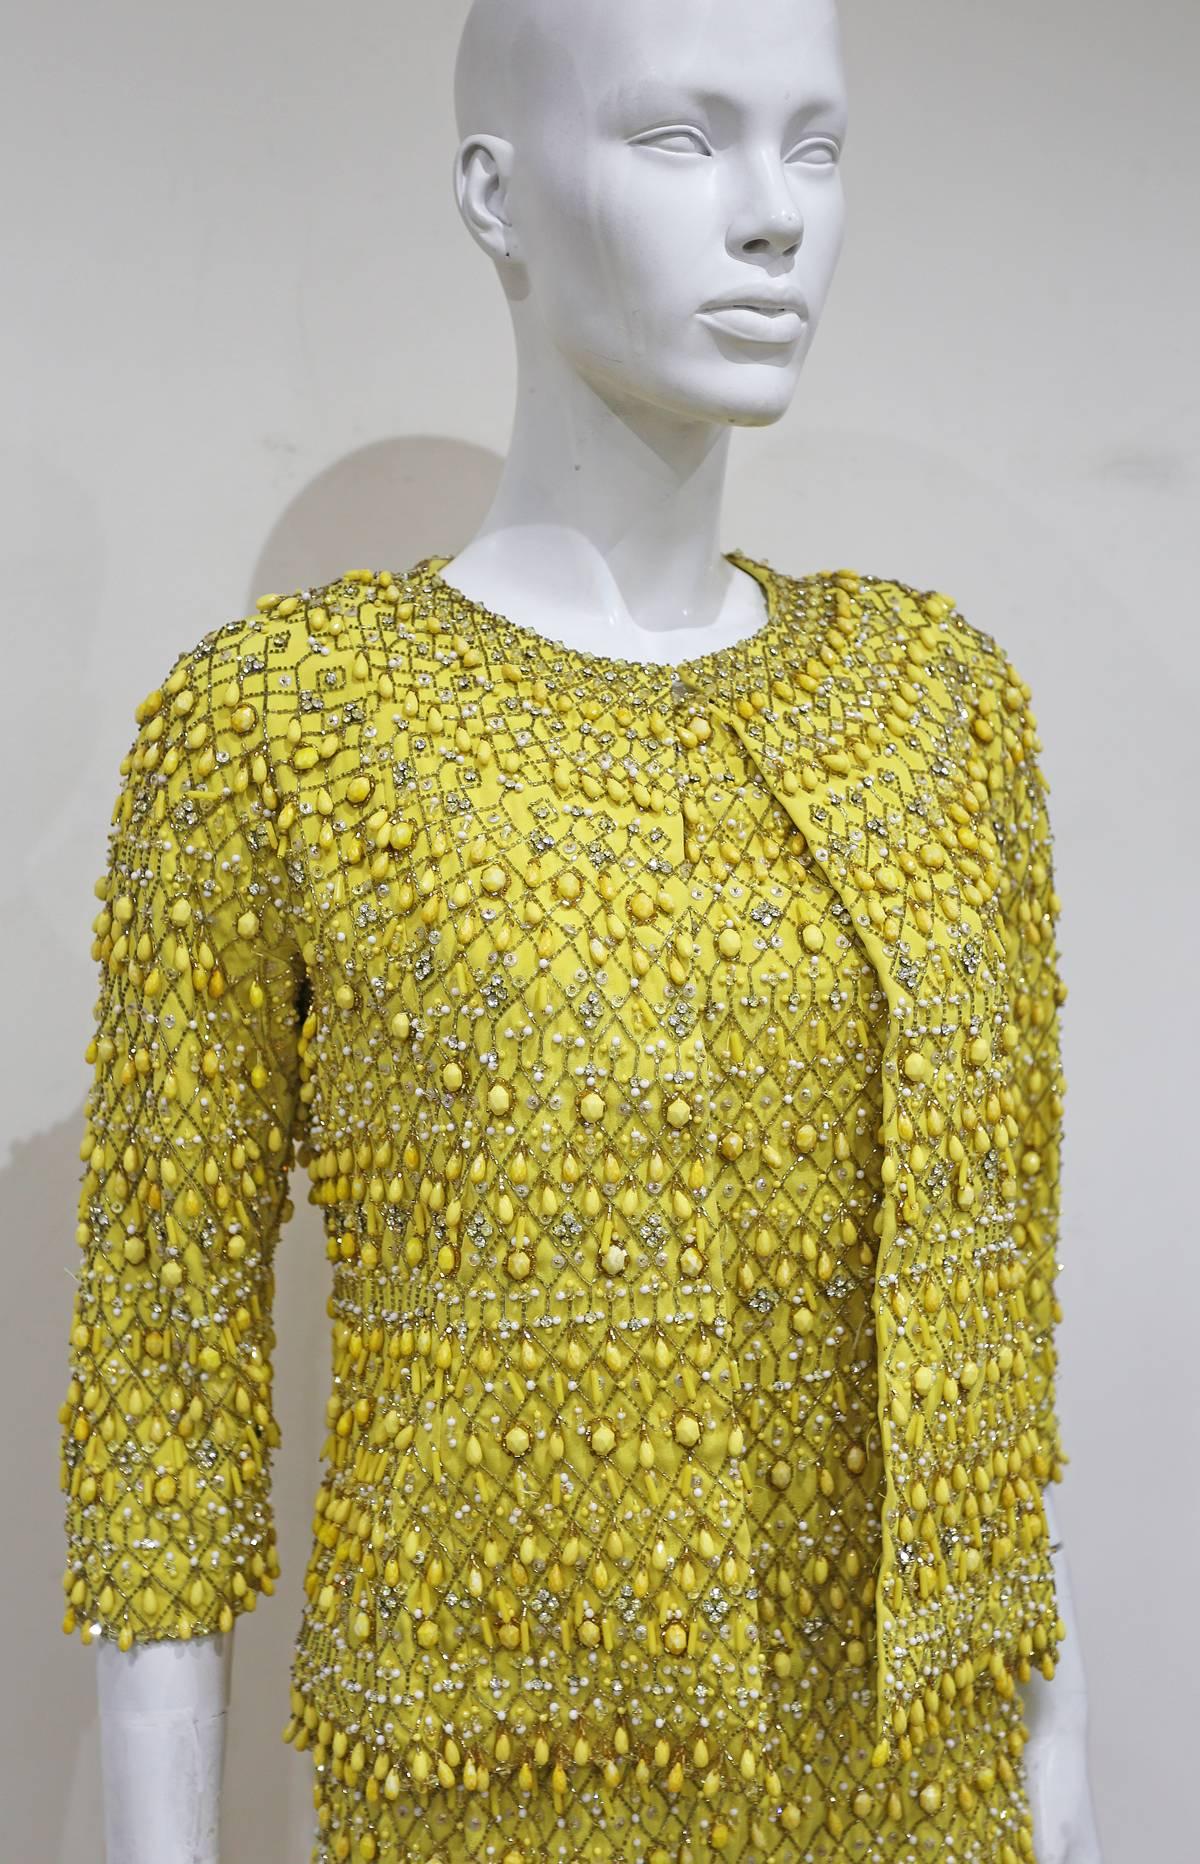 Late 1960´s haute couture evening ensemble in yellow, sleeveless dress has a V-neck at the Back and a side slit, long sleeve jacket, embroidered with rhinestones and glass-paste beads. The richness of the colour and materials contrasts with the